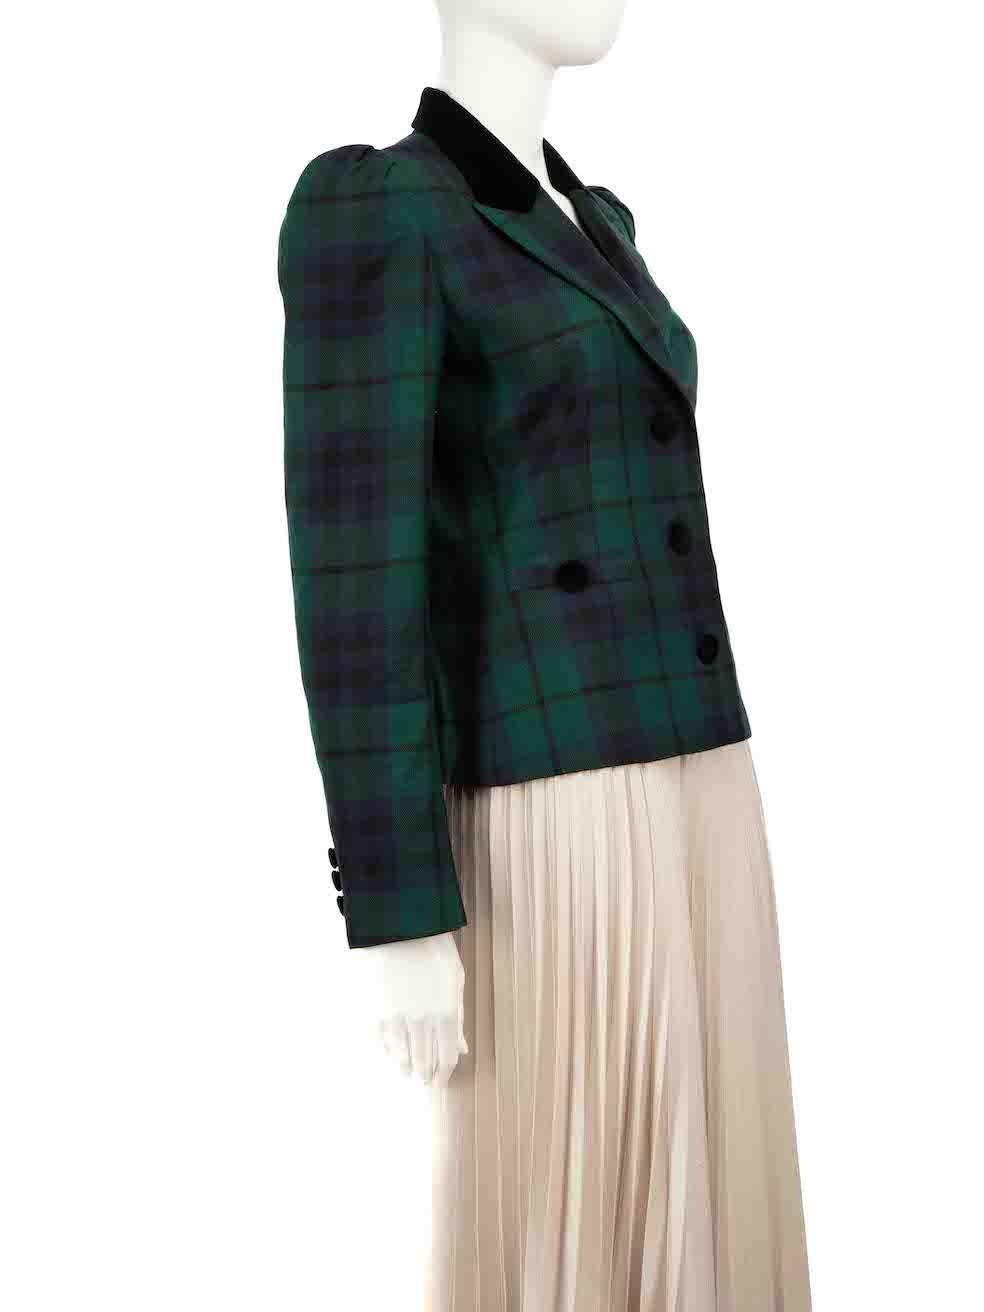 CONDITION is Never worn, with tags. No visible wear to blazer is evident on this new Alessandra Rich designer resale item.
 
 
 
 Details
 
 
 Green
 
 Wool
 
 Blazer
 
 Tartan pattern
 
 Button fastening
 
 Shoulder pads
 
 2x Front pockets
 
 
 
